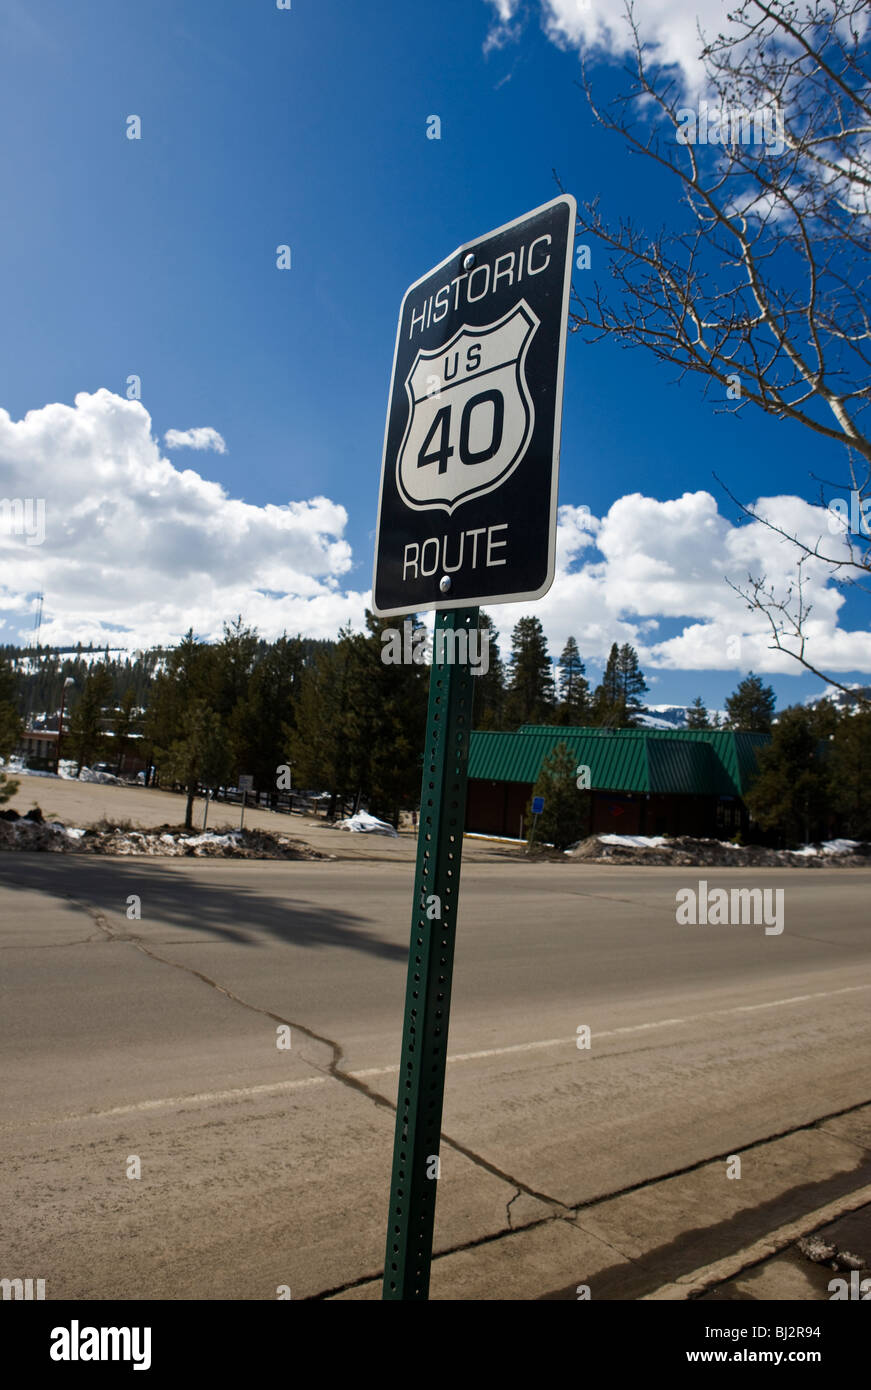 Historic Route US 40 sign, Truckee, California, United States of America Stock Photo